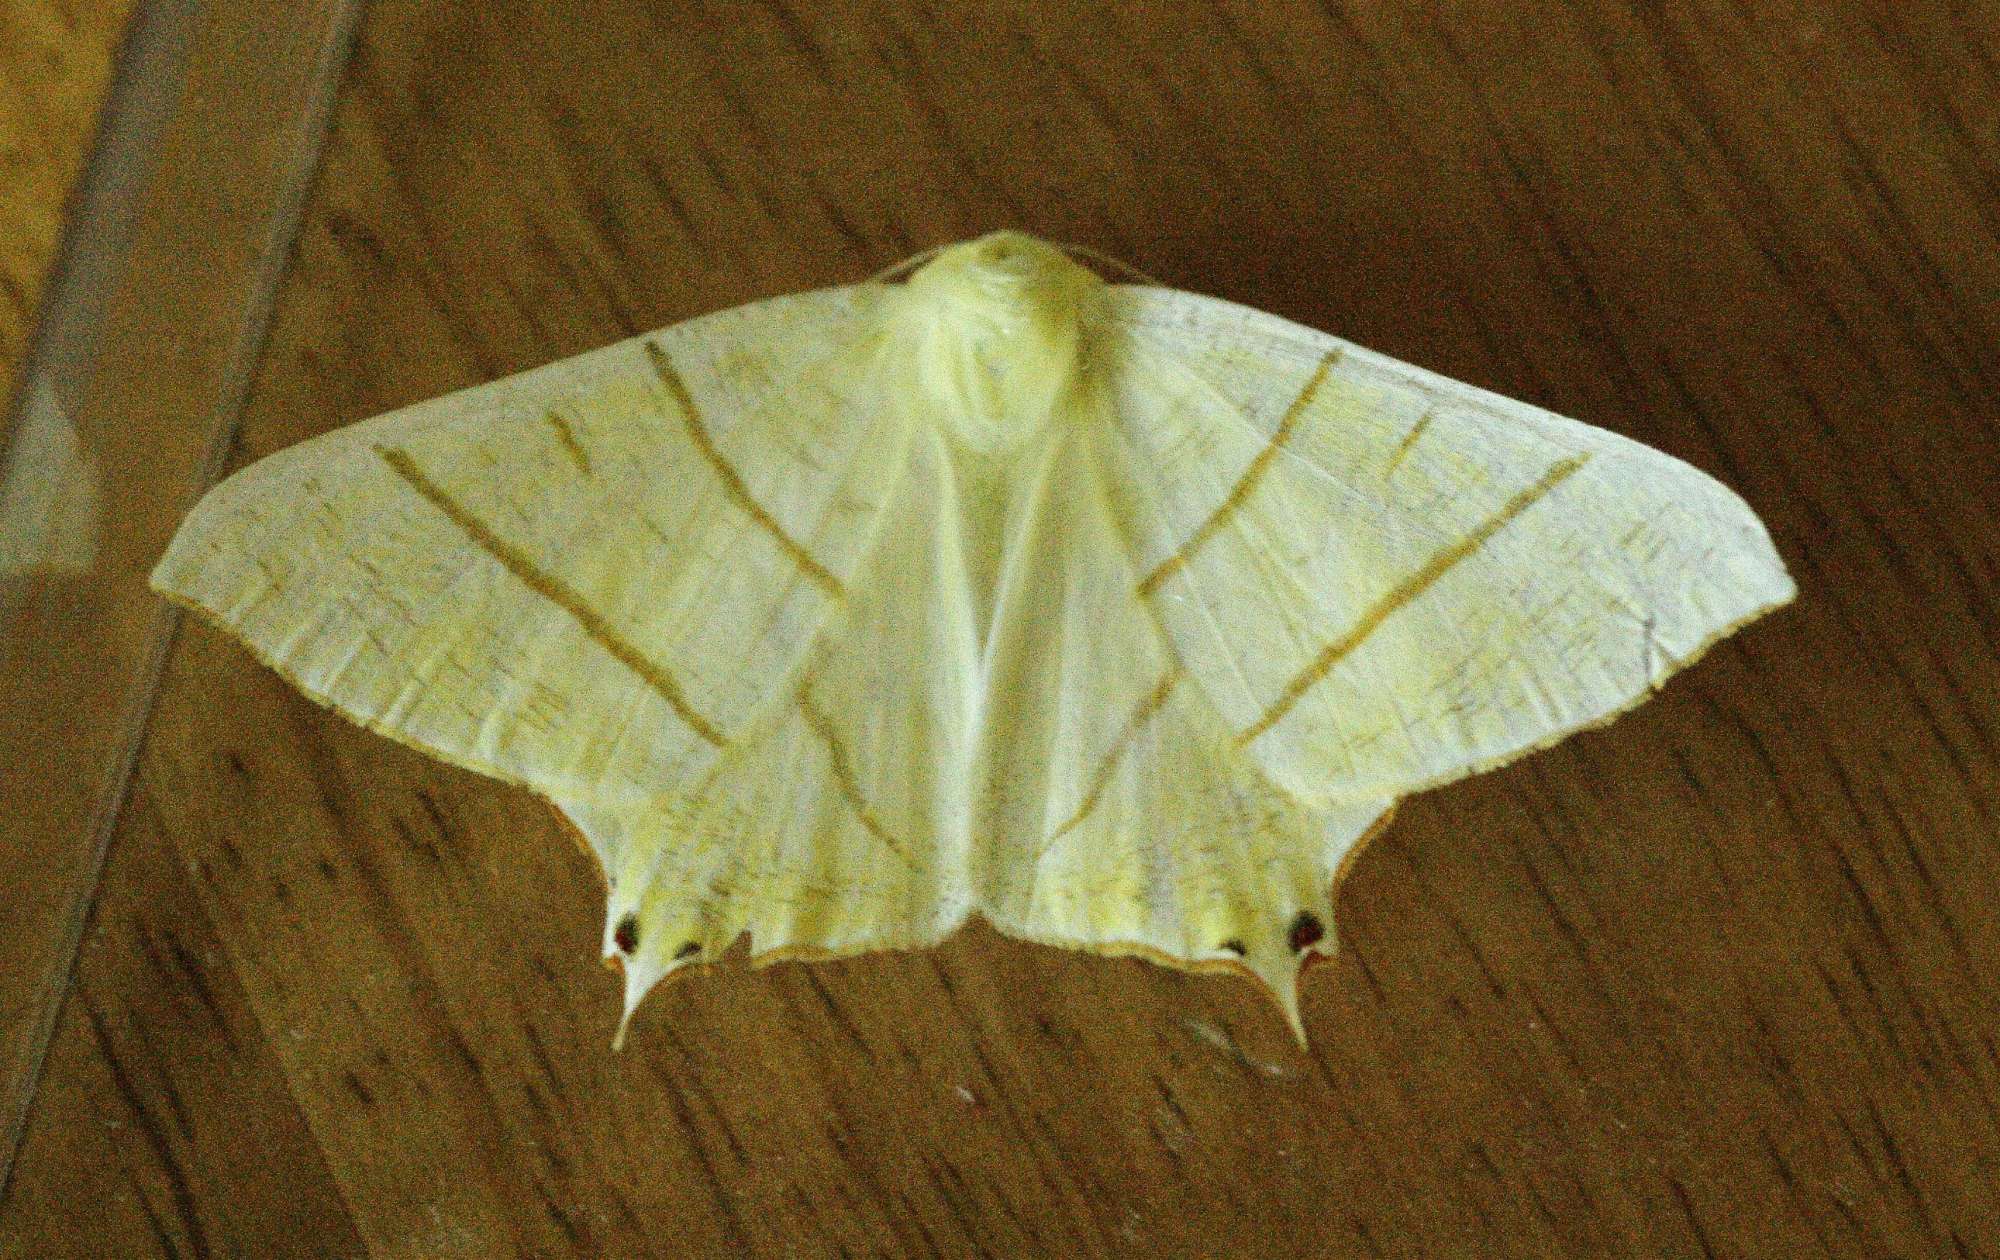 Swallow-tailed Moth (Ourapteryx sambucaria) photographed in Somerset by John Connolly